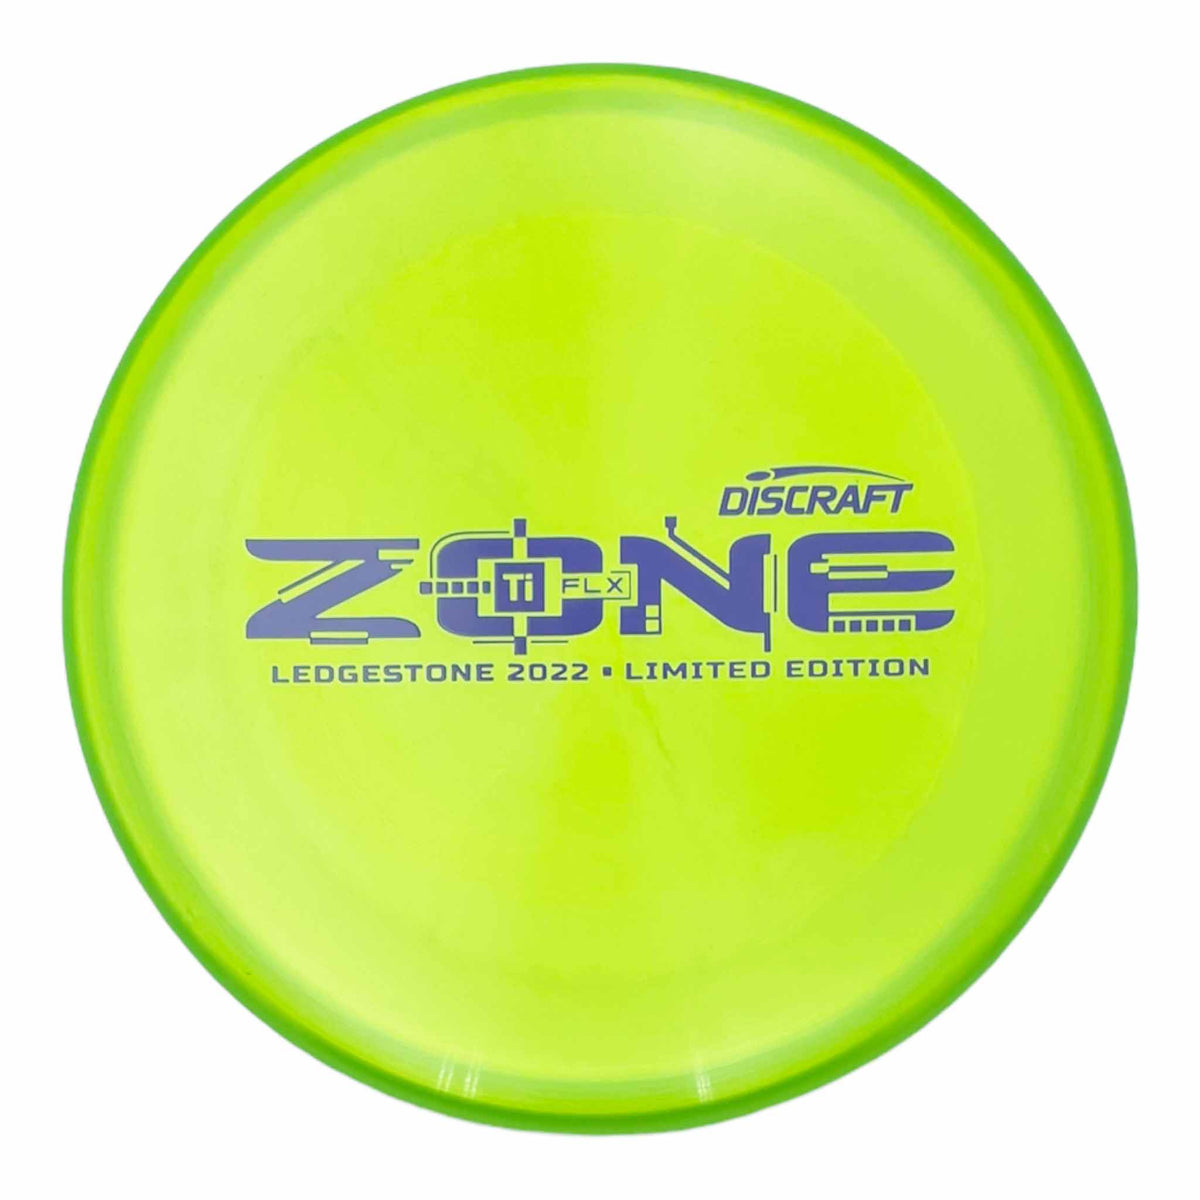 Discraft 2022 Ledgestione Limited Edition Ti FLX Zone putter and approach - Green / Purple